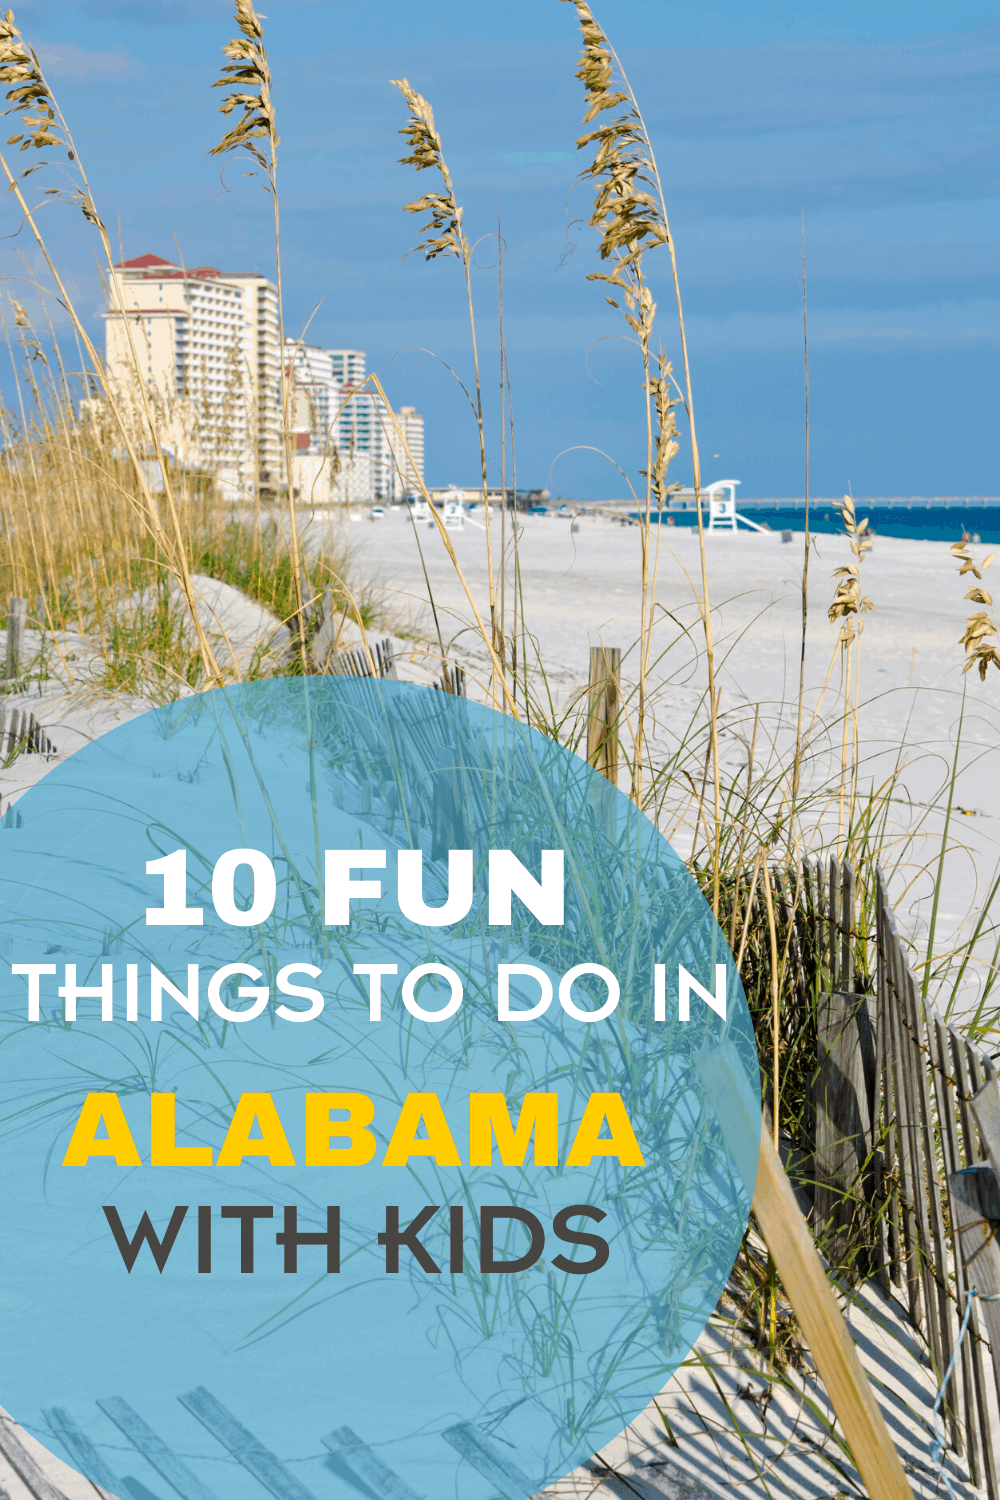 Over 30 Fun Things to do in Alabama with Kids on a Family Vacation